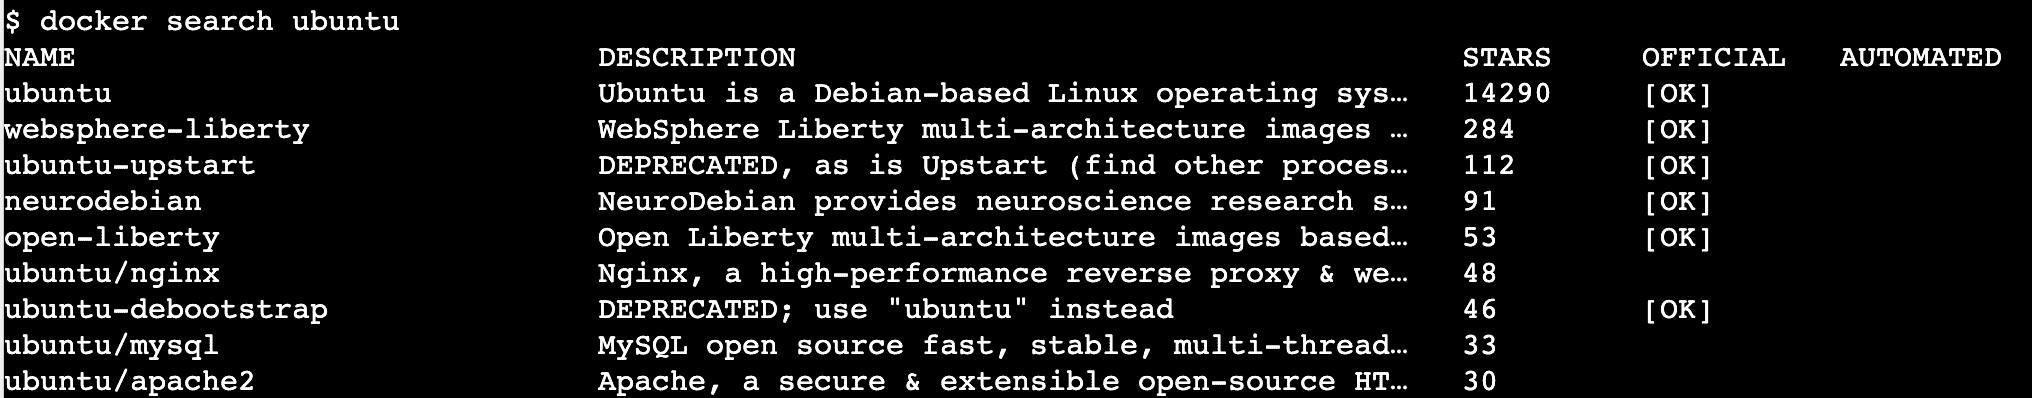 Docker search ubuntu command run in a terminal and results displaying all the images matching the search query